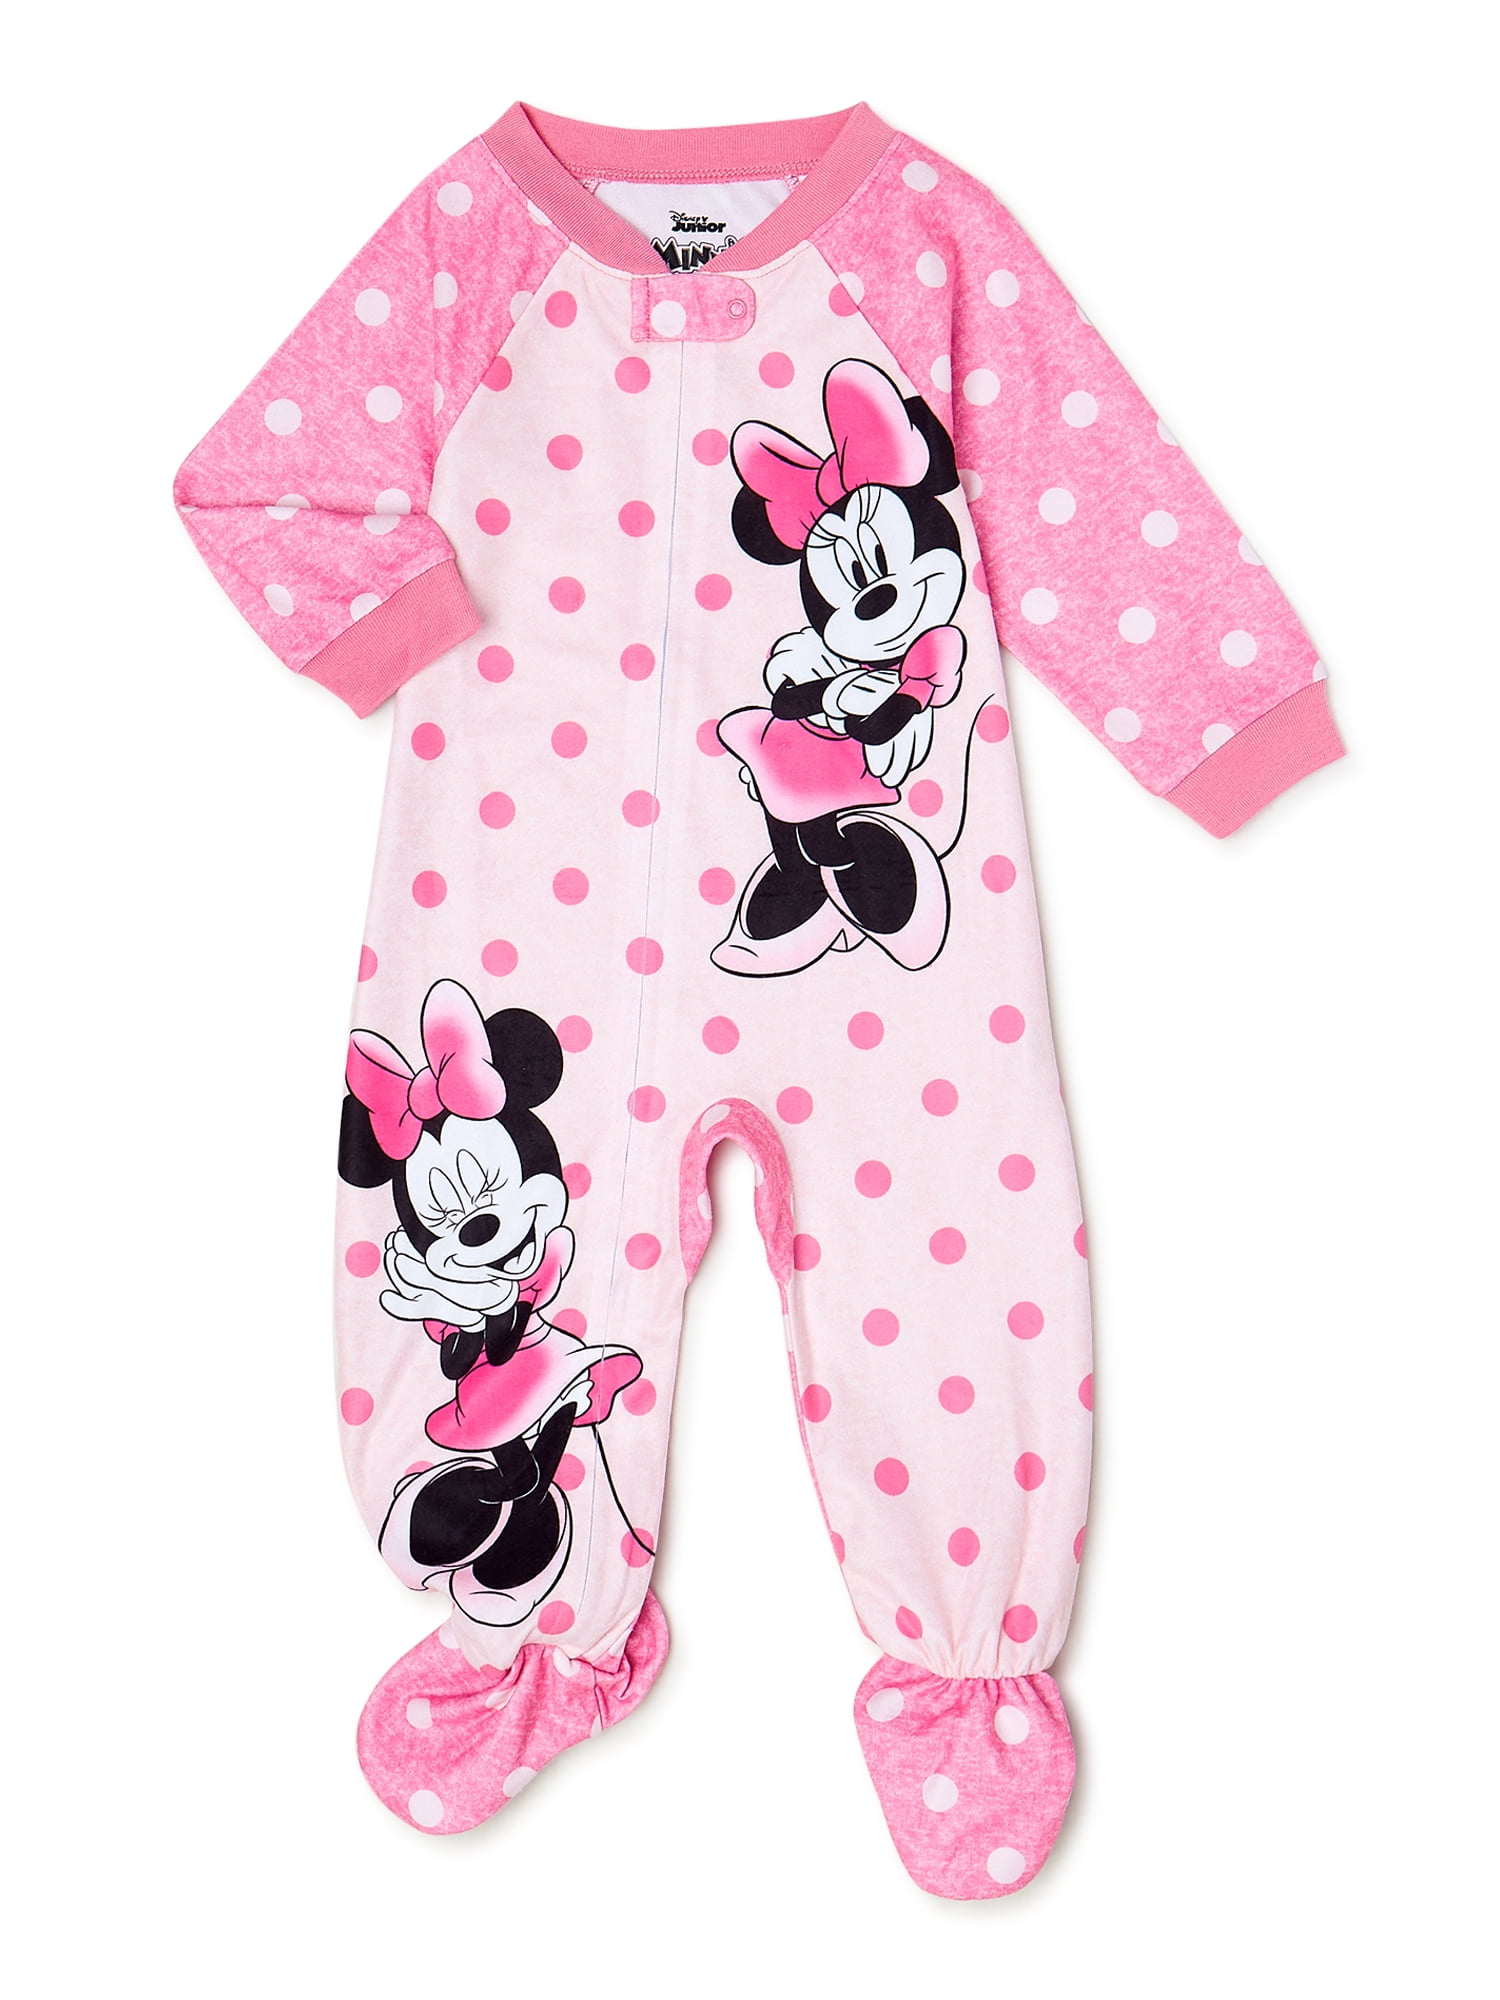 Minnie Mouse Baby and Toddler Girls' Blanket Sleeper, Sizes 12M-5T